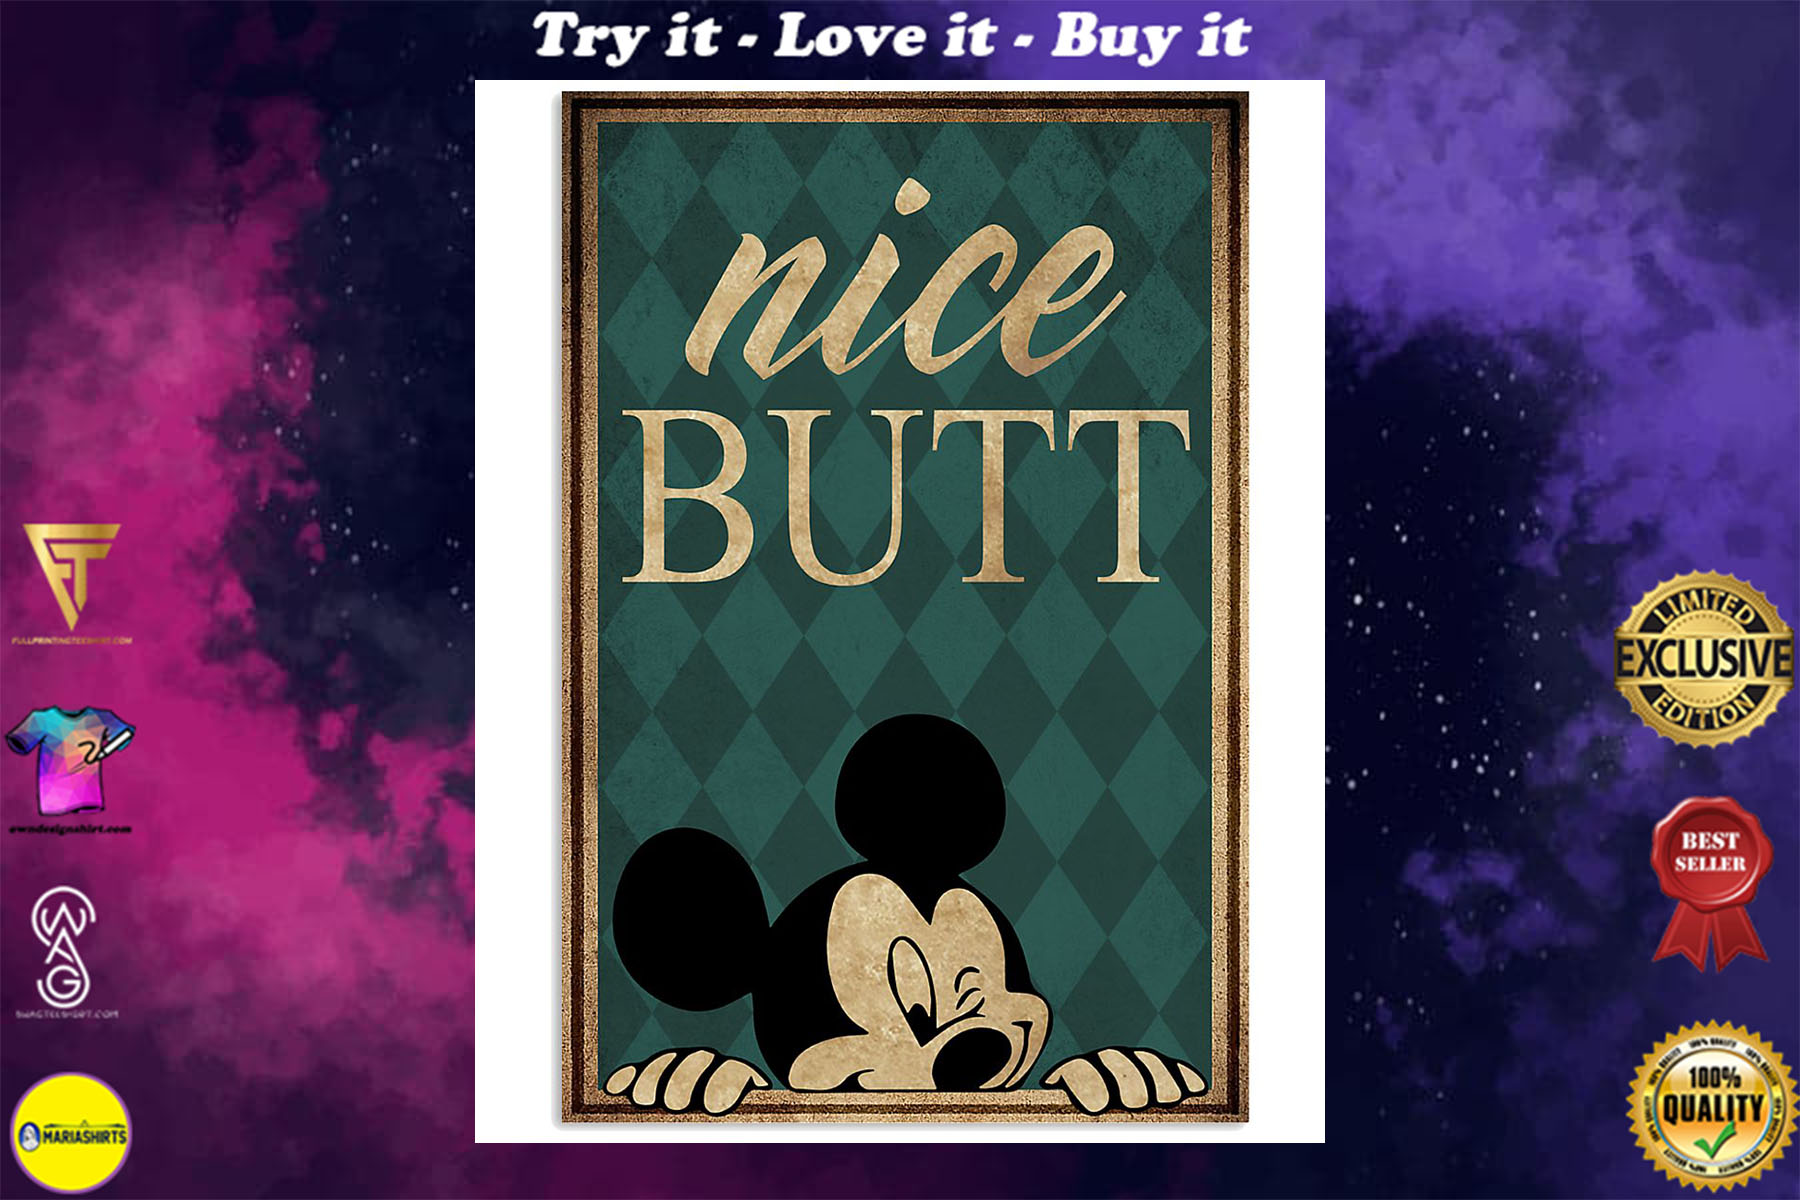 mickey mouse nice butt retro poster